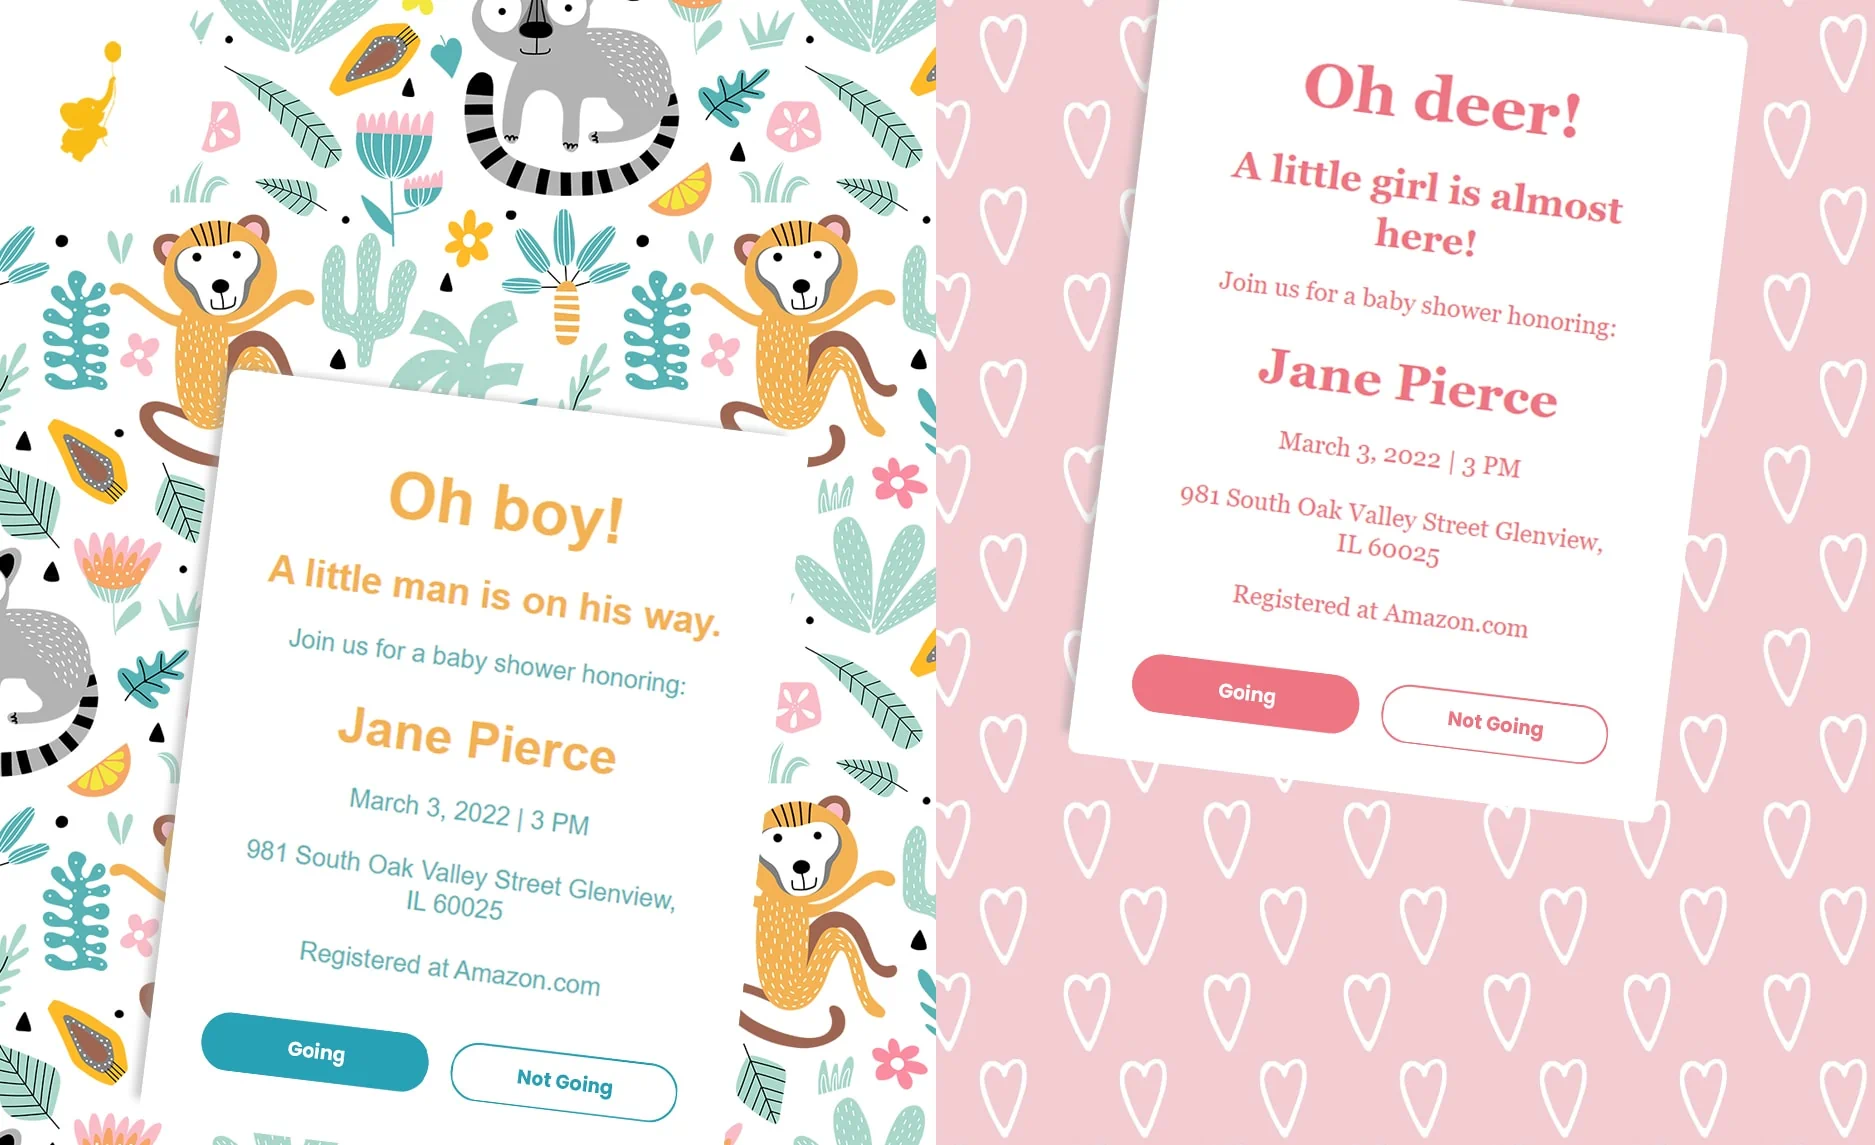 27 Funny Baby Shower Invitation Wording Ideas for Your Party